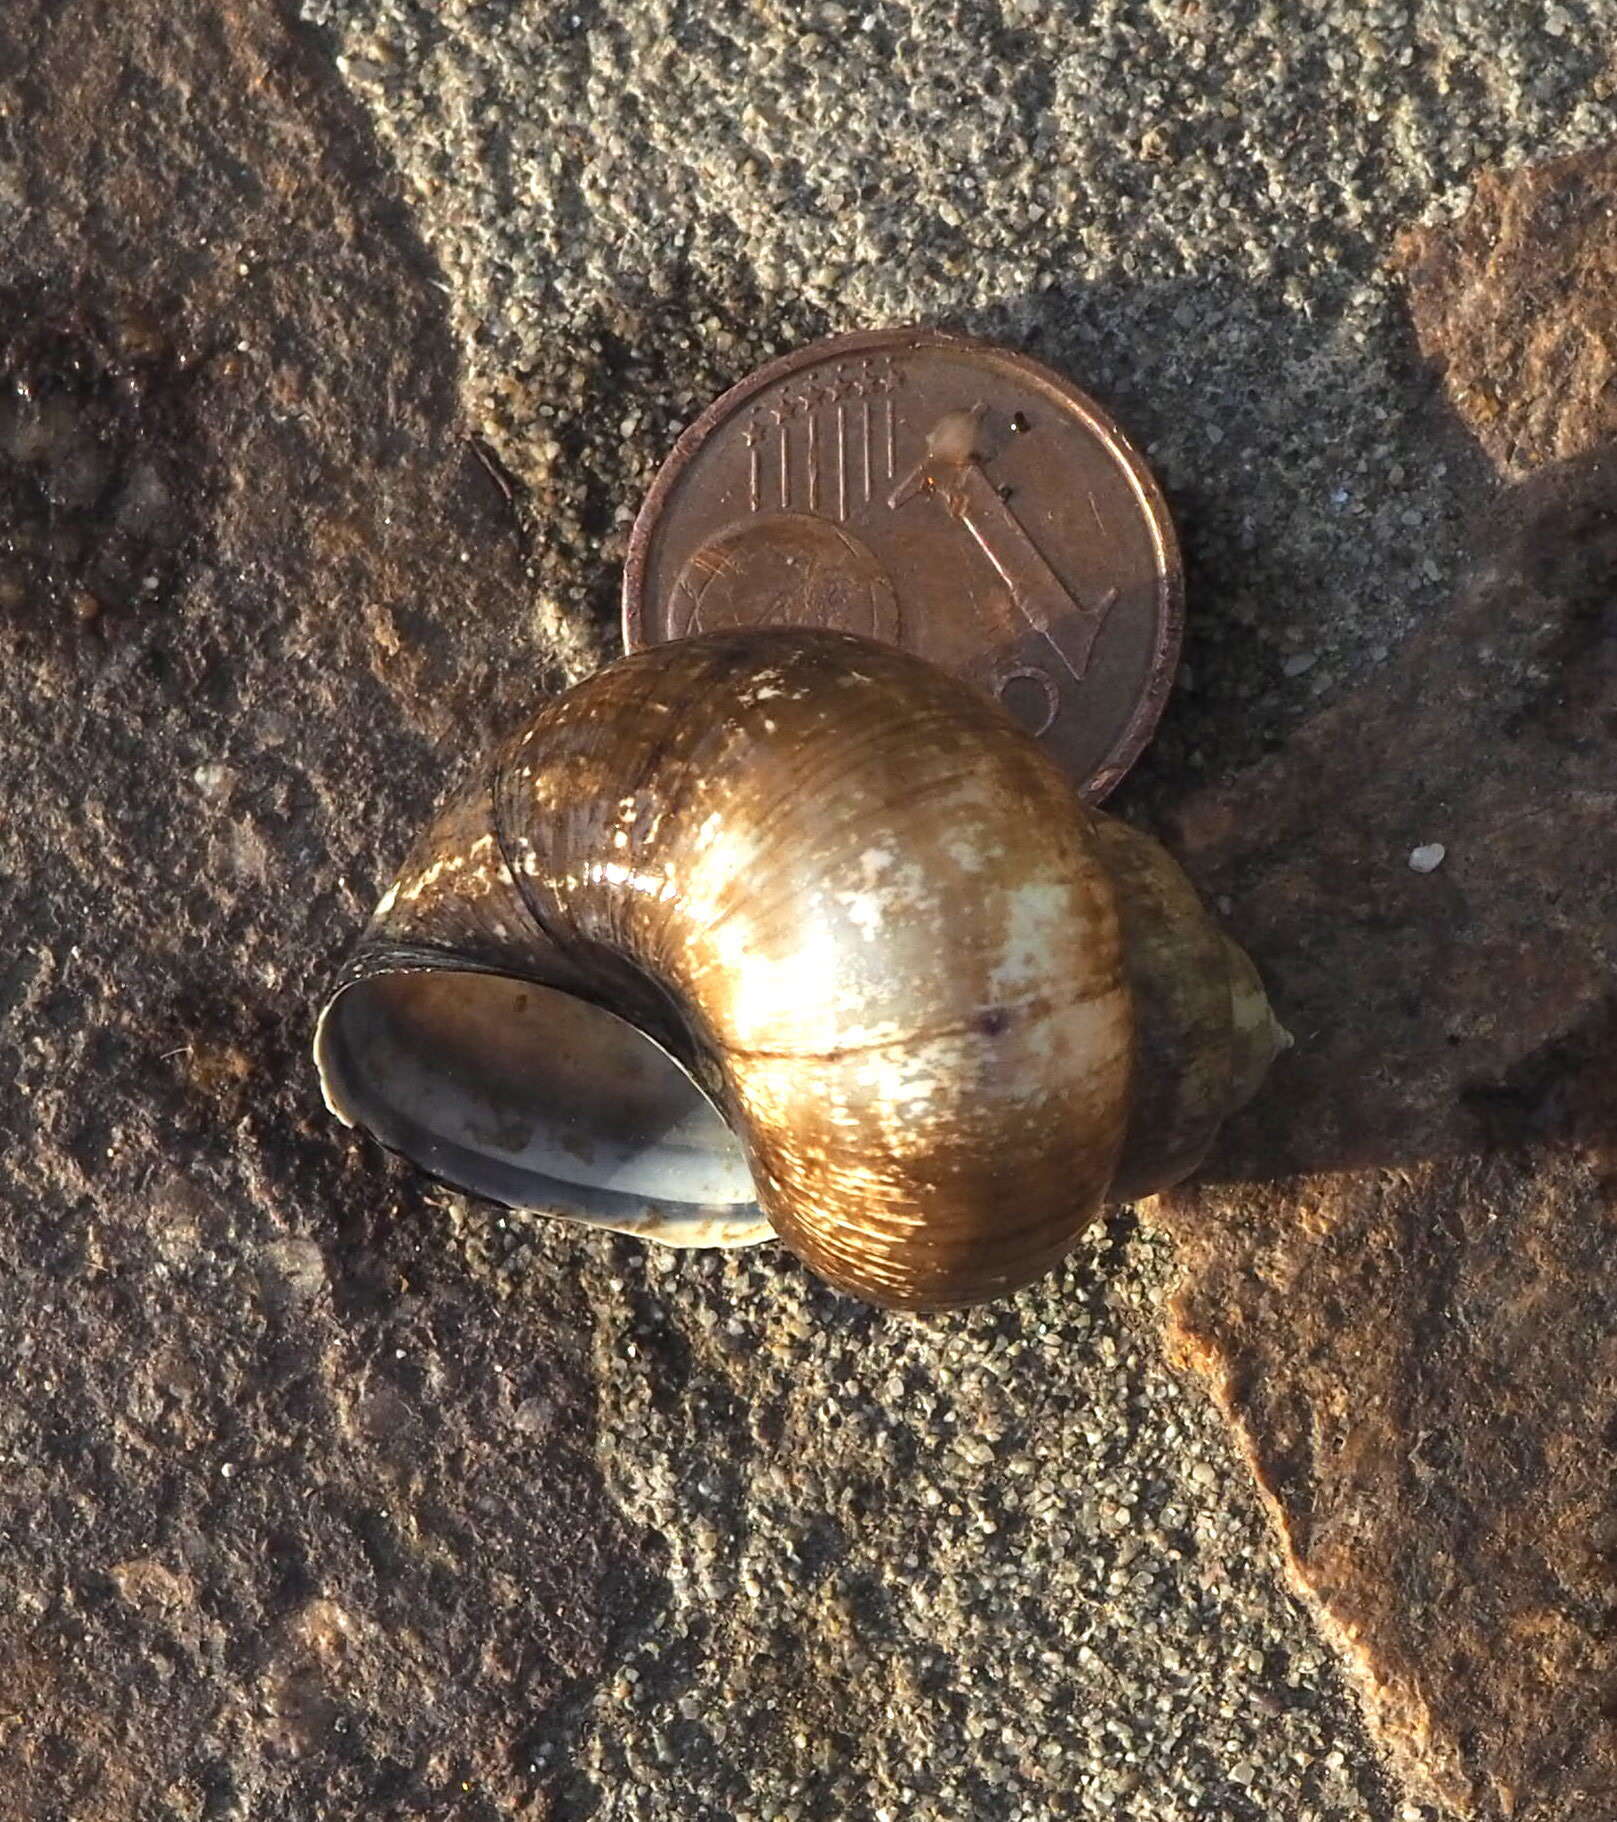 Image of Lister's River Snail